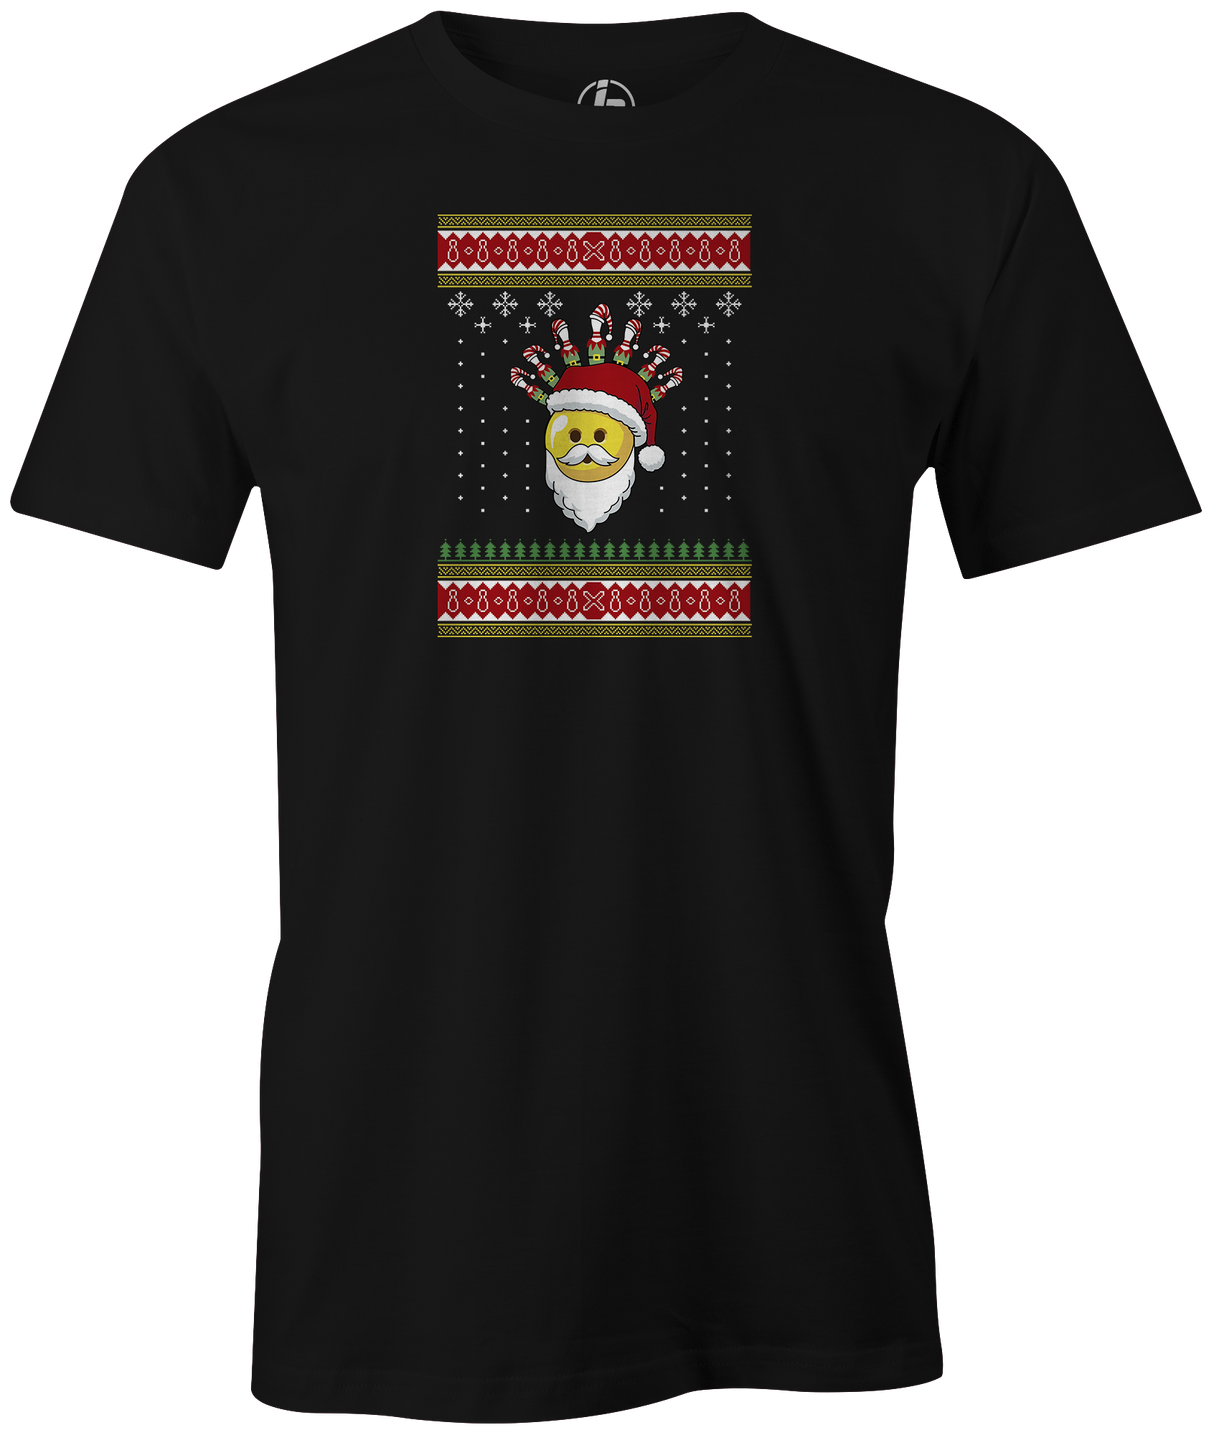 Tis' the season for ugly Christmas bowling tee shirt sweaters. Our The Santa Ball tee!  ugly t-shirt comes in red and black colors. Show your holiday spirit with this shirt that helps you hook the ball at your office party or night out with your friends!  Bowling gift holiday gift guide. Tee-shirt gift. Christmas Tree